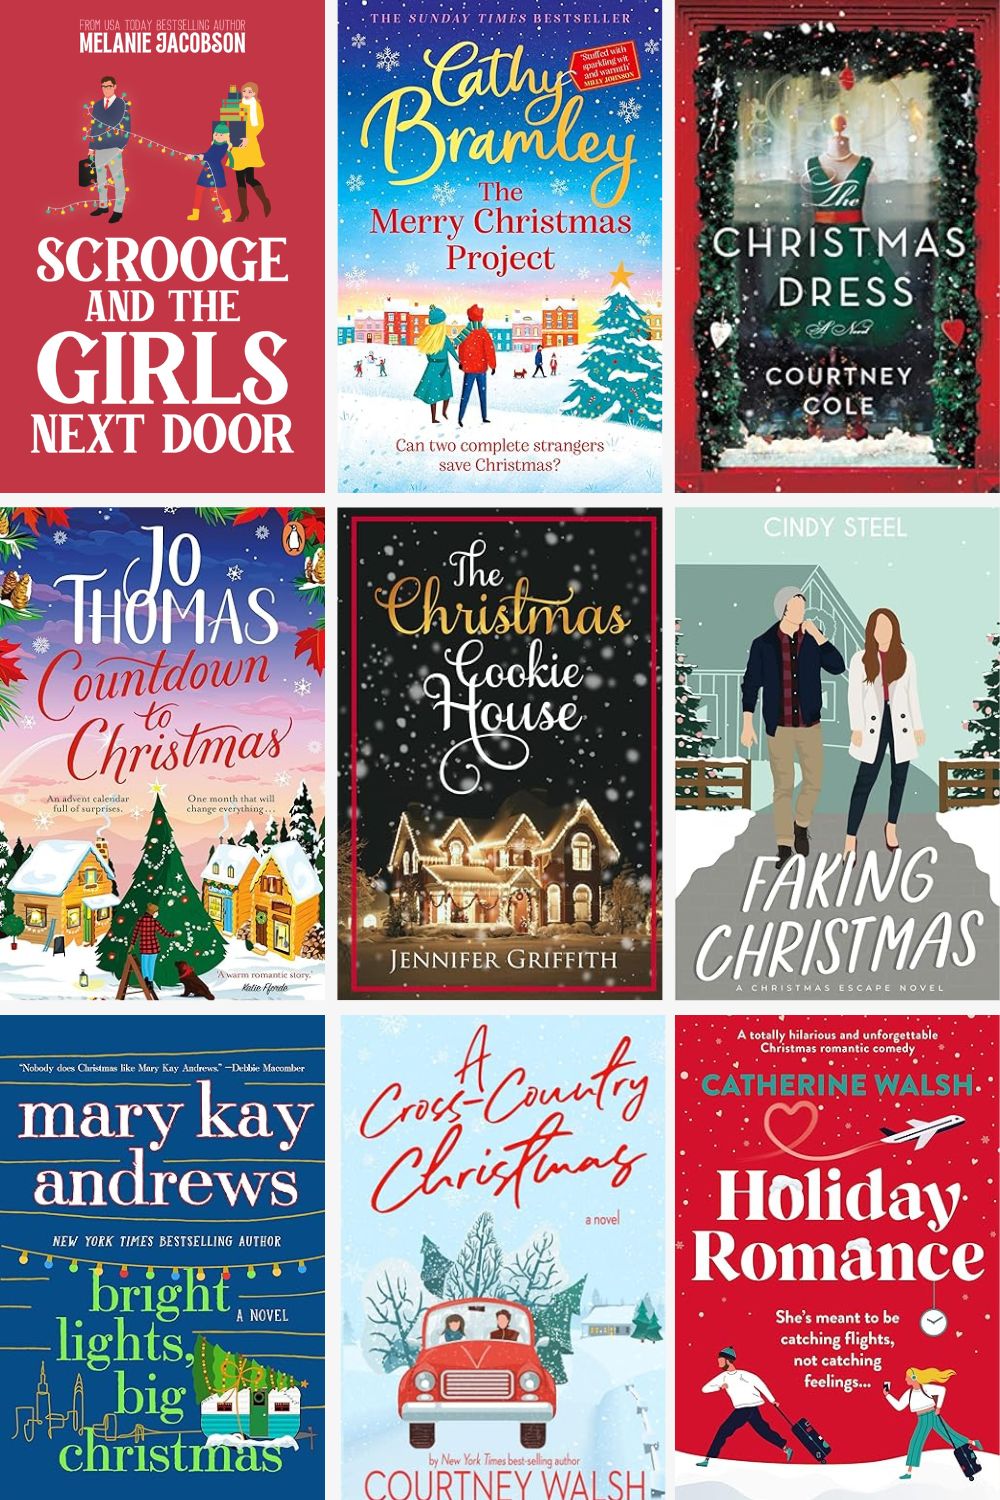 Fall in Love This Holiday Season with These Christmas Romance Novels